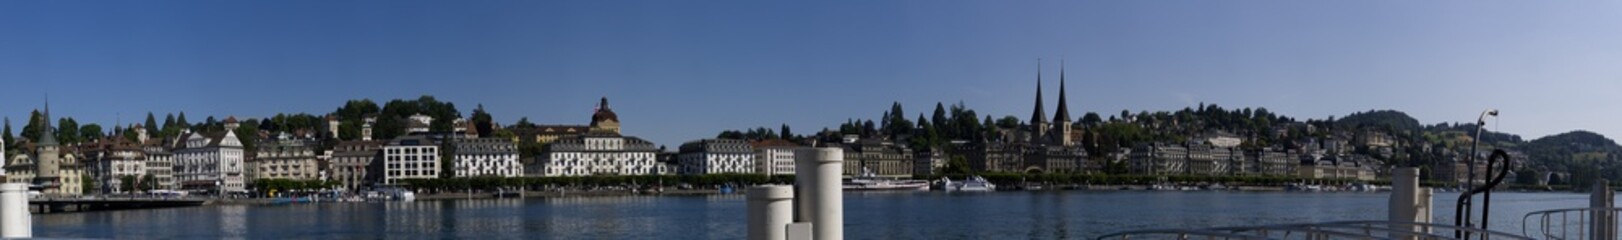 Panorama view of town on Lake Lucerne Switzerland